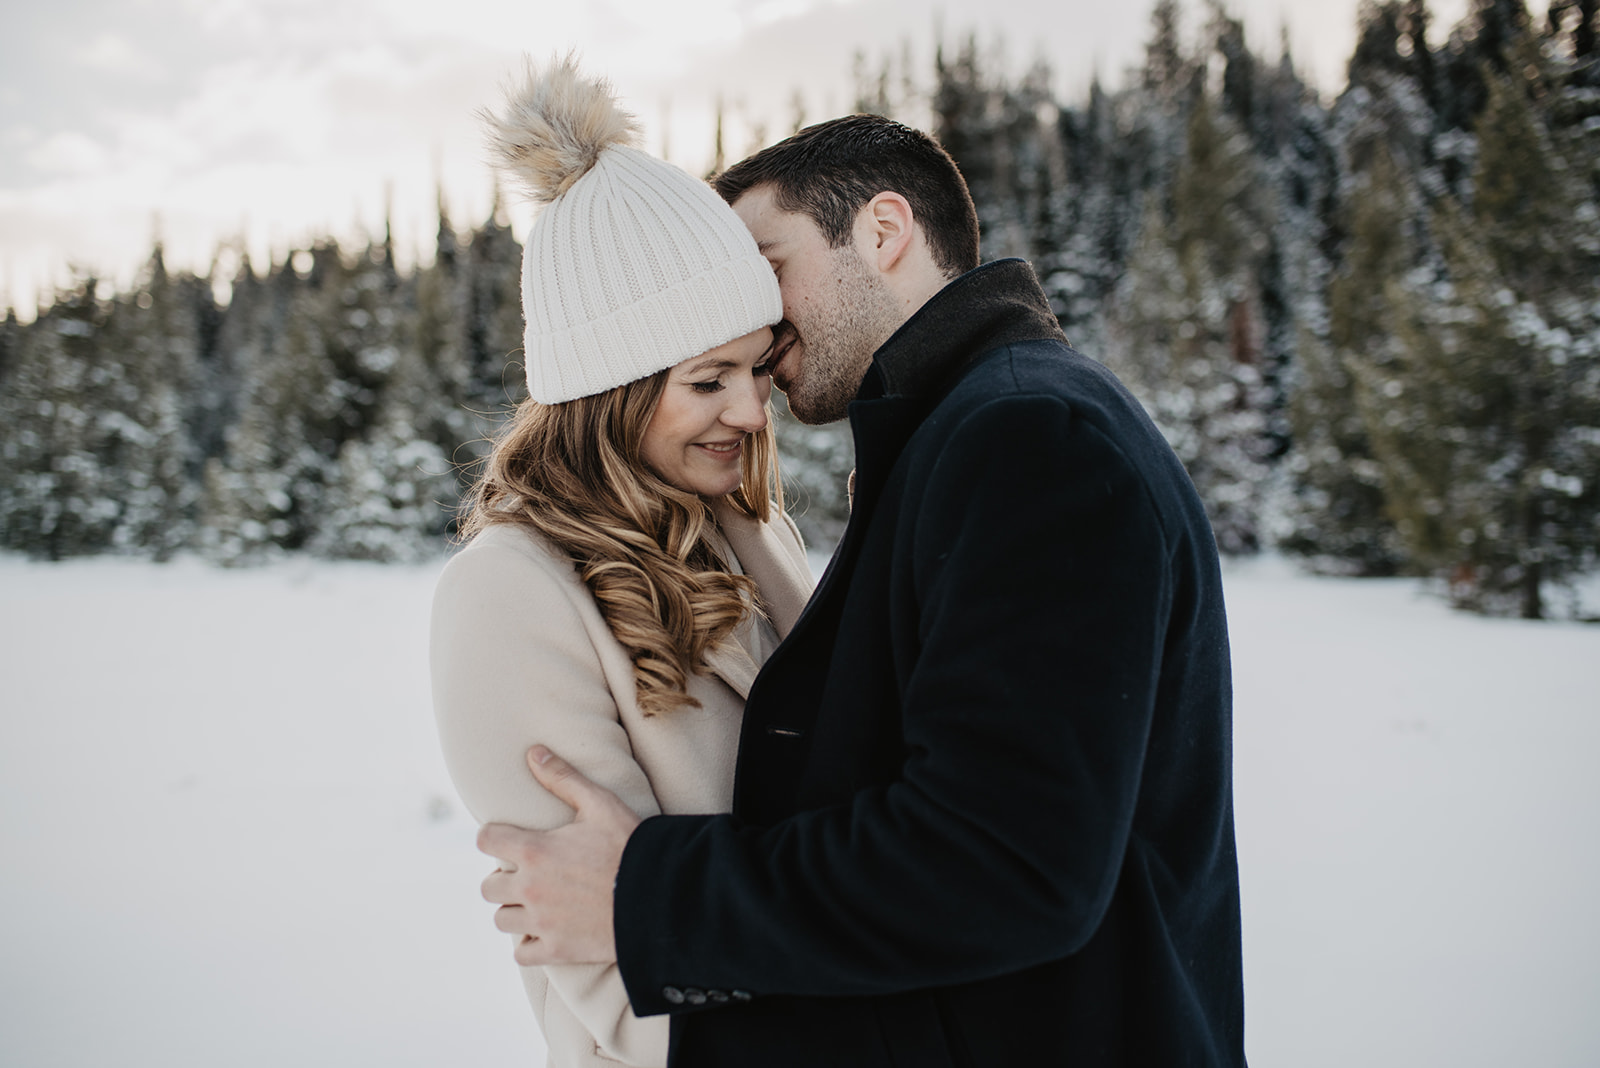 man whispering in woman's ear while holding her close as she looks down and smiles in the snow in front of pine tress in Jackson Hole